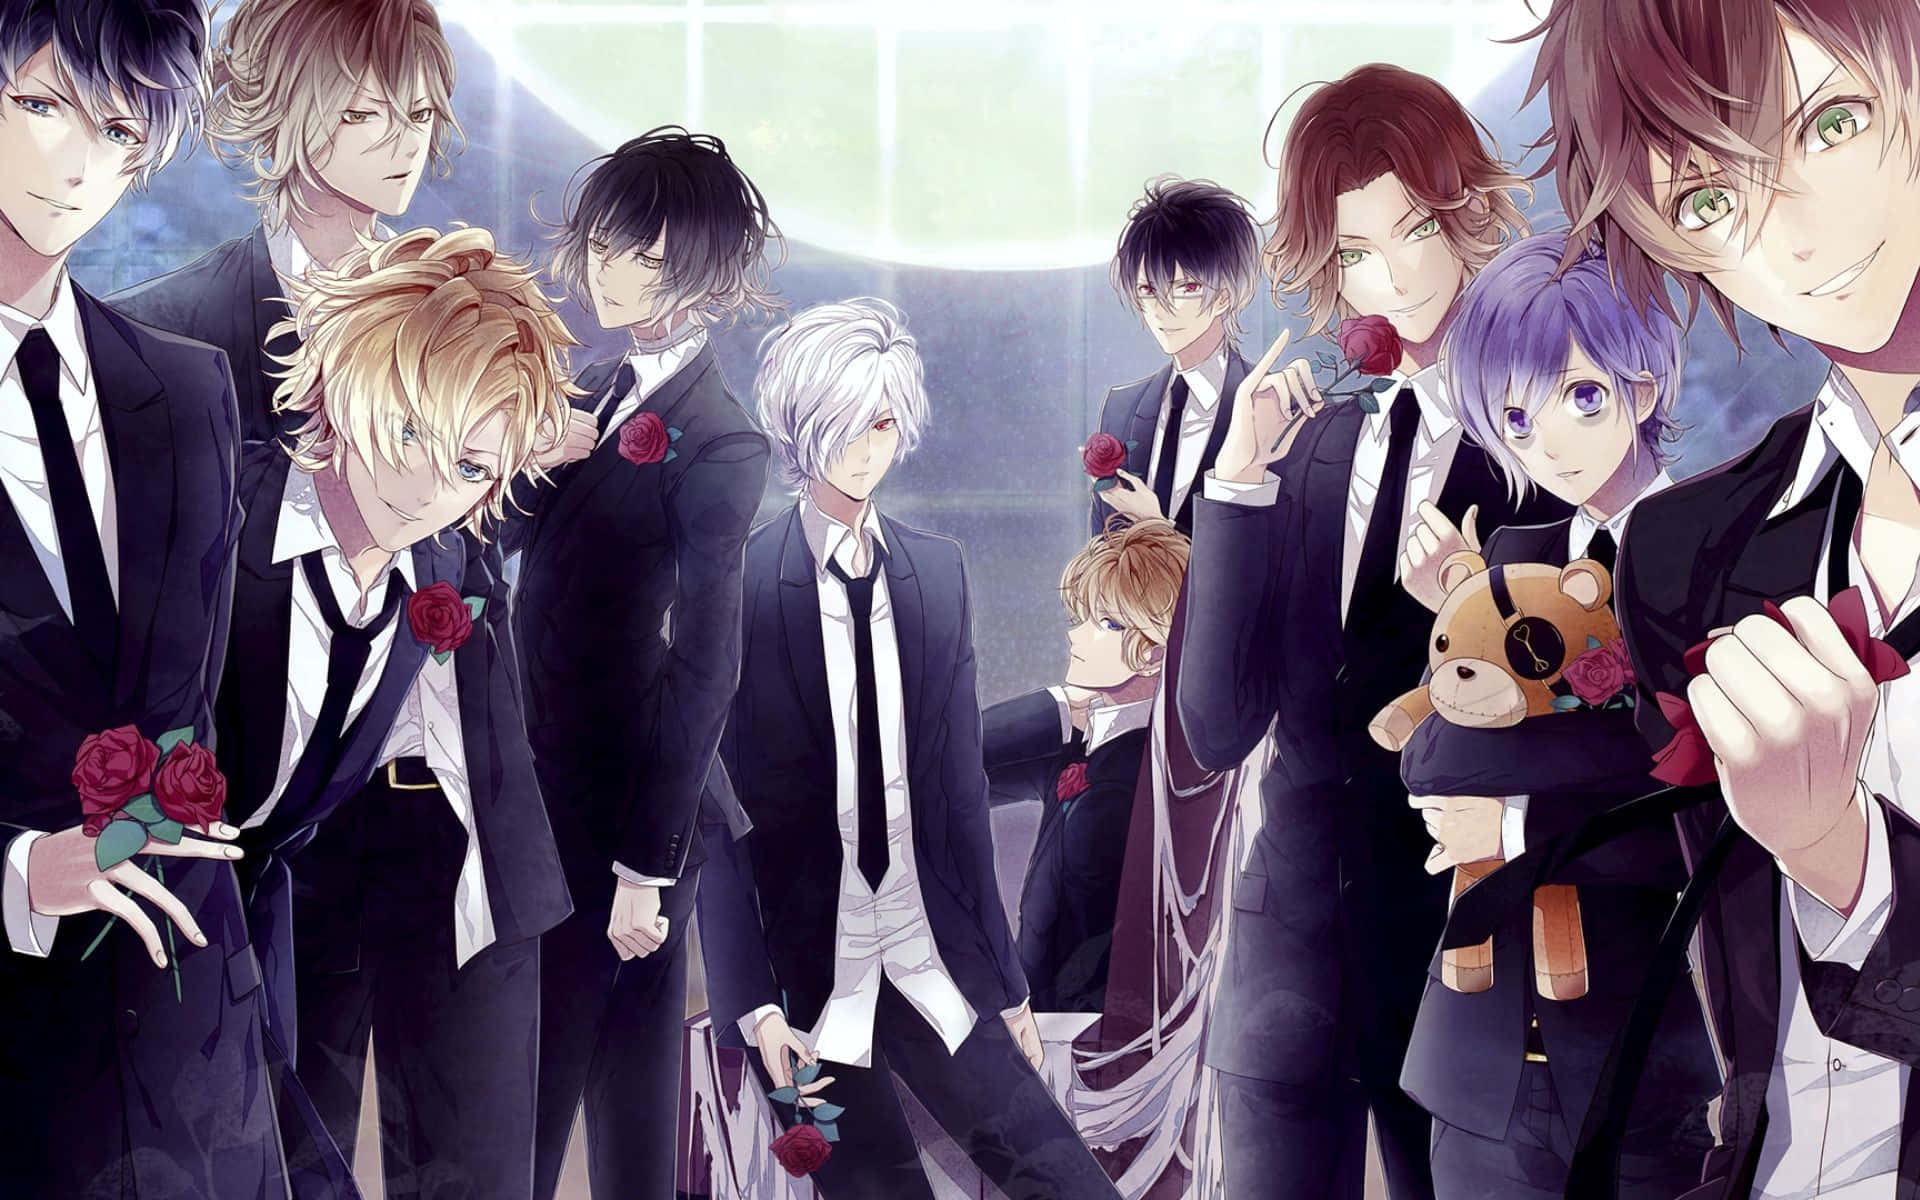 Find yourself lost in the darkness of Diabolik Lovers